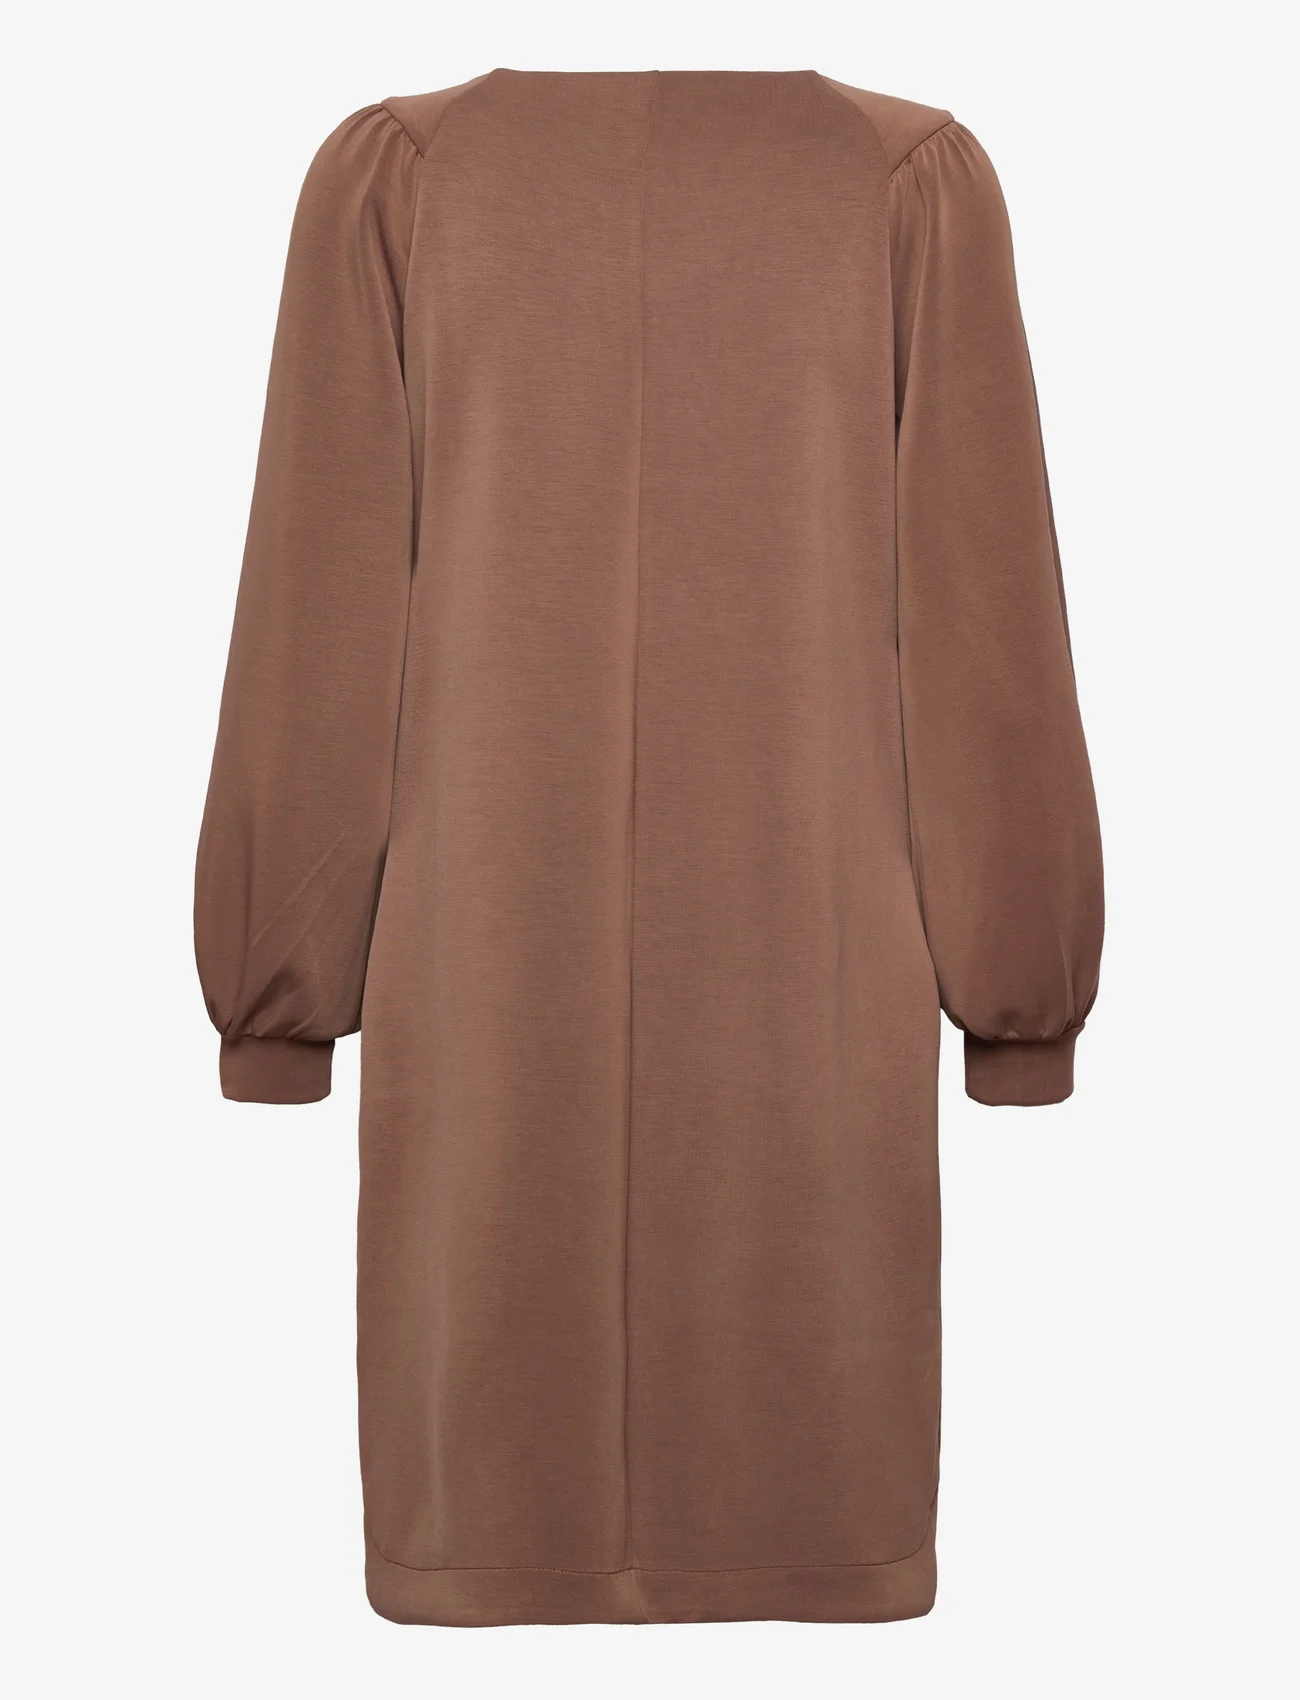 My Essential Wardrobe - MWElle Dress - t-shirt dresses - toffee brown washed - 1